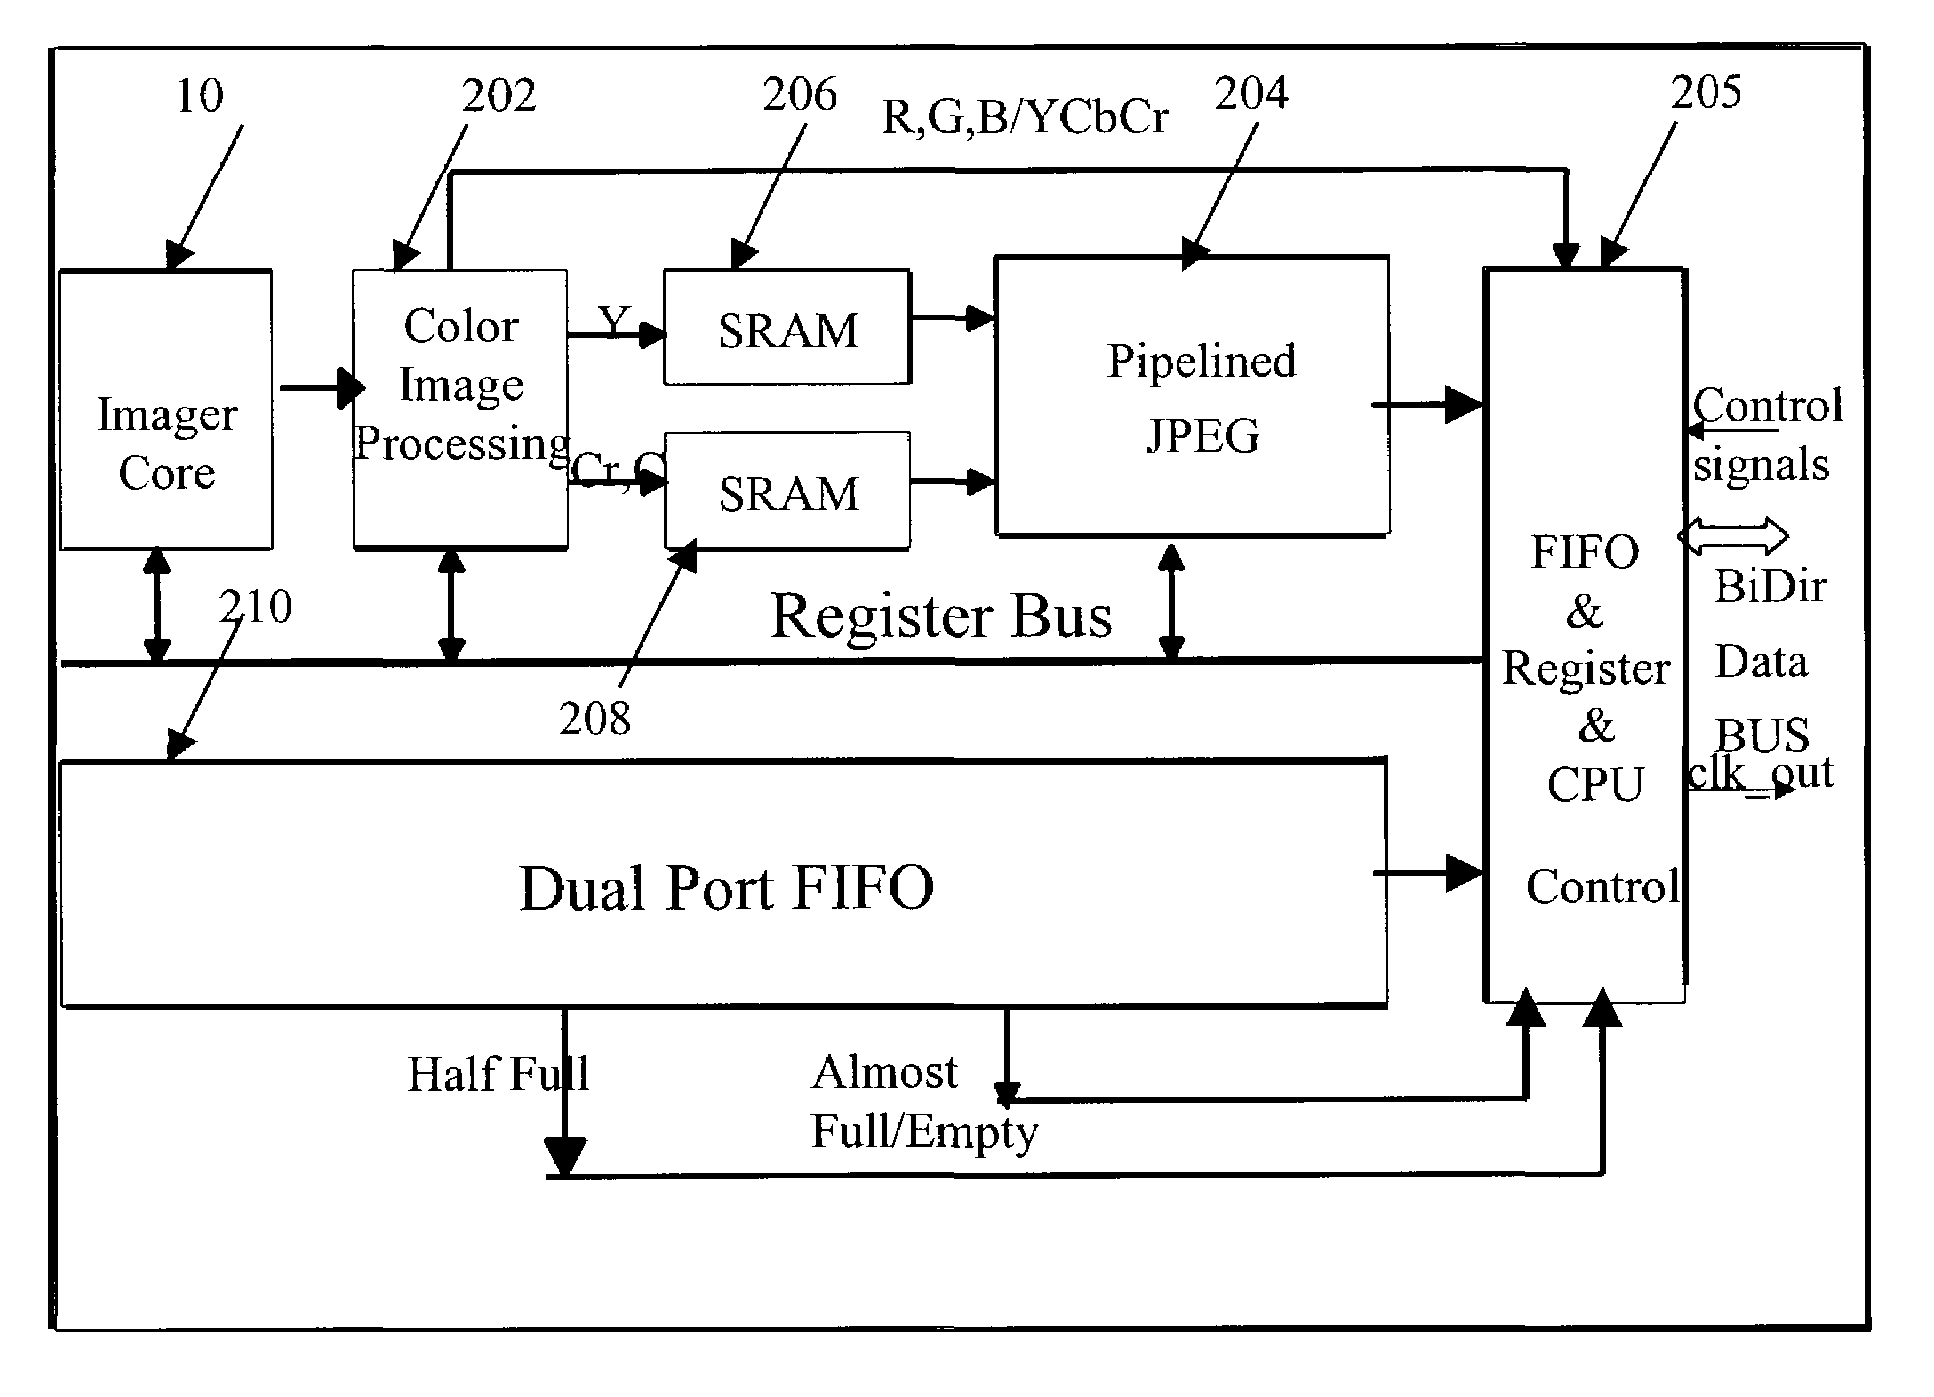 CMOS image sensor apparatus with on-chip real-time pipelined JPEG compression module